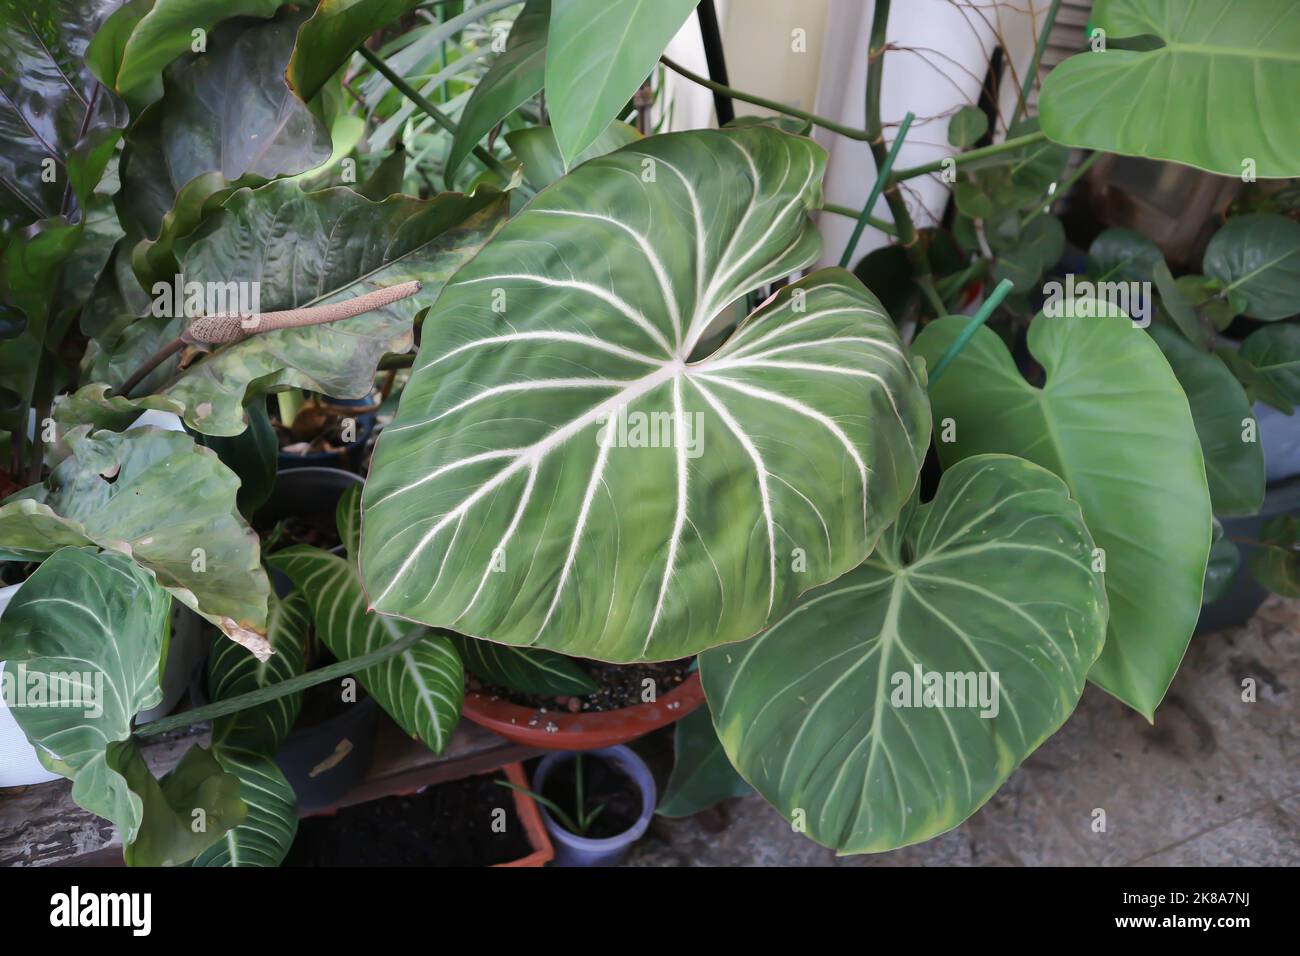 Philodendron Gloriosum ,Philodendron plant in the garden Stock Photo